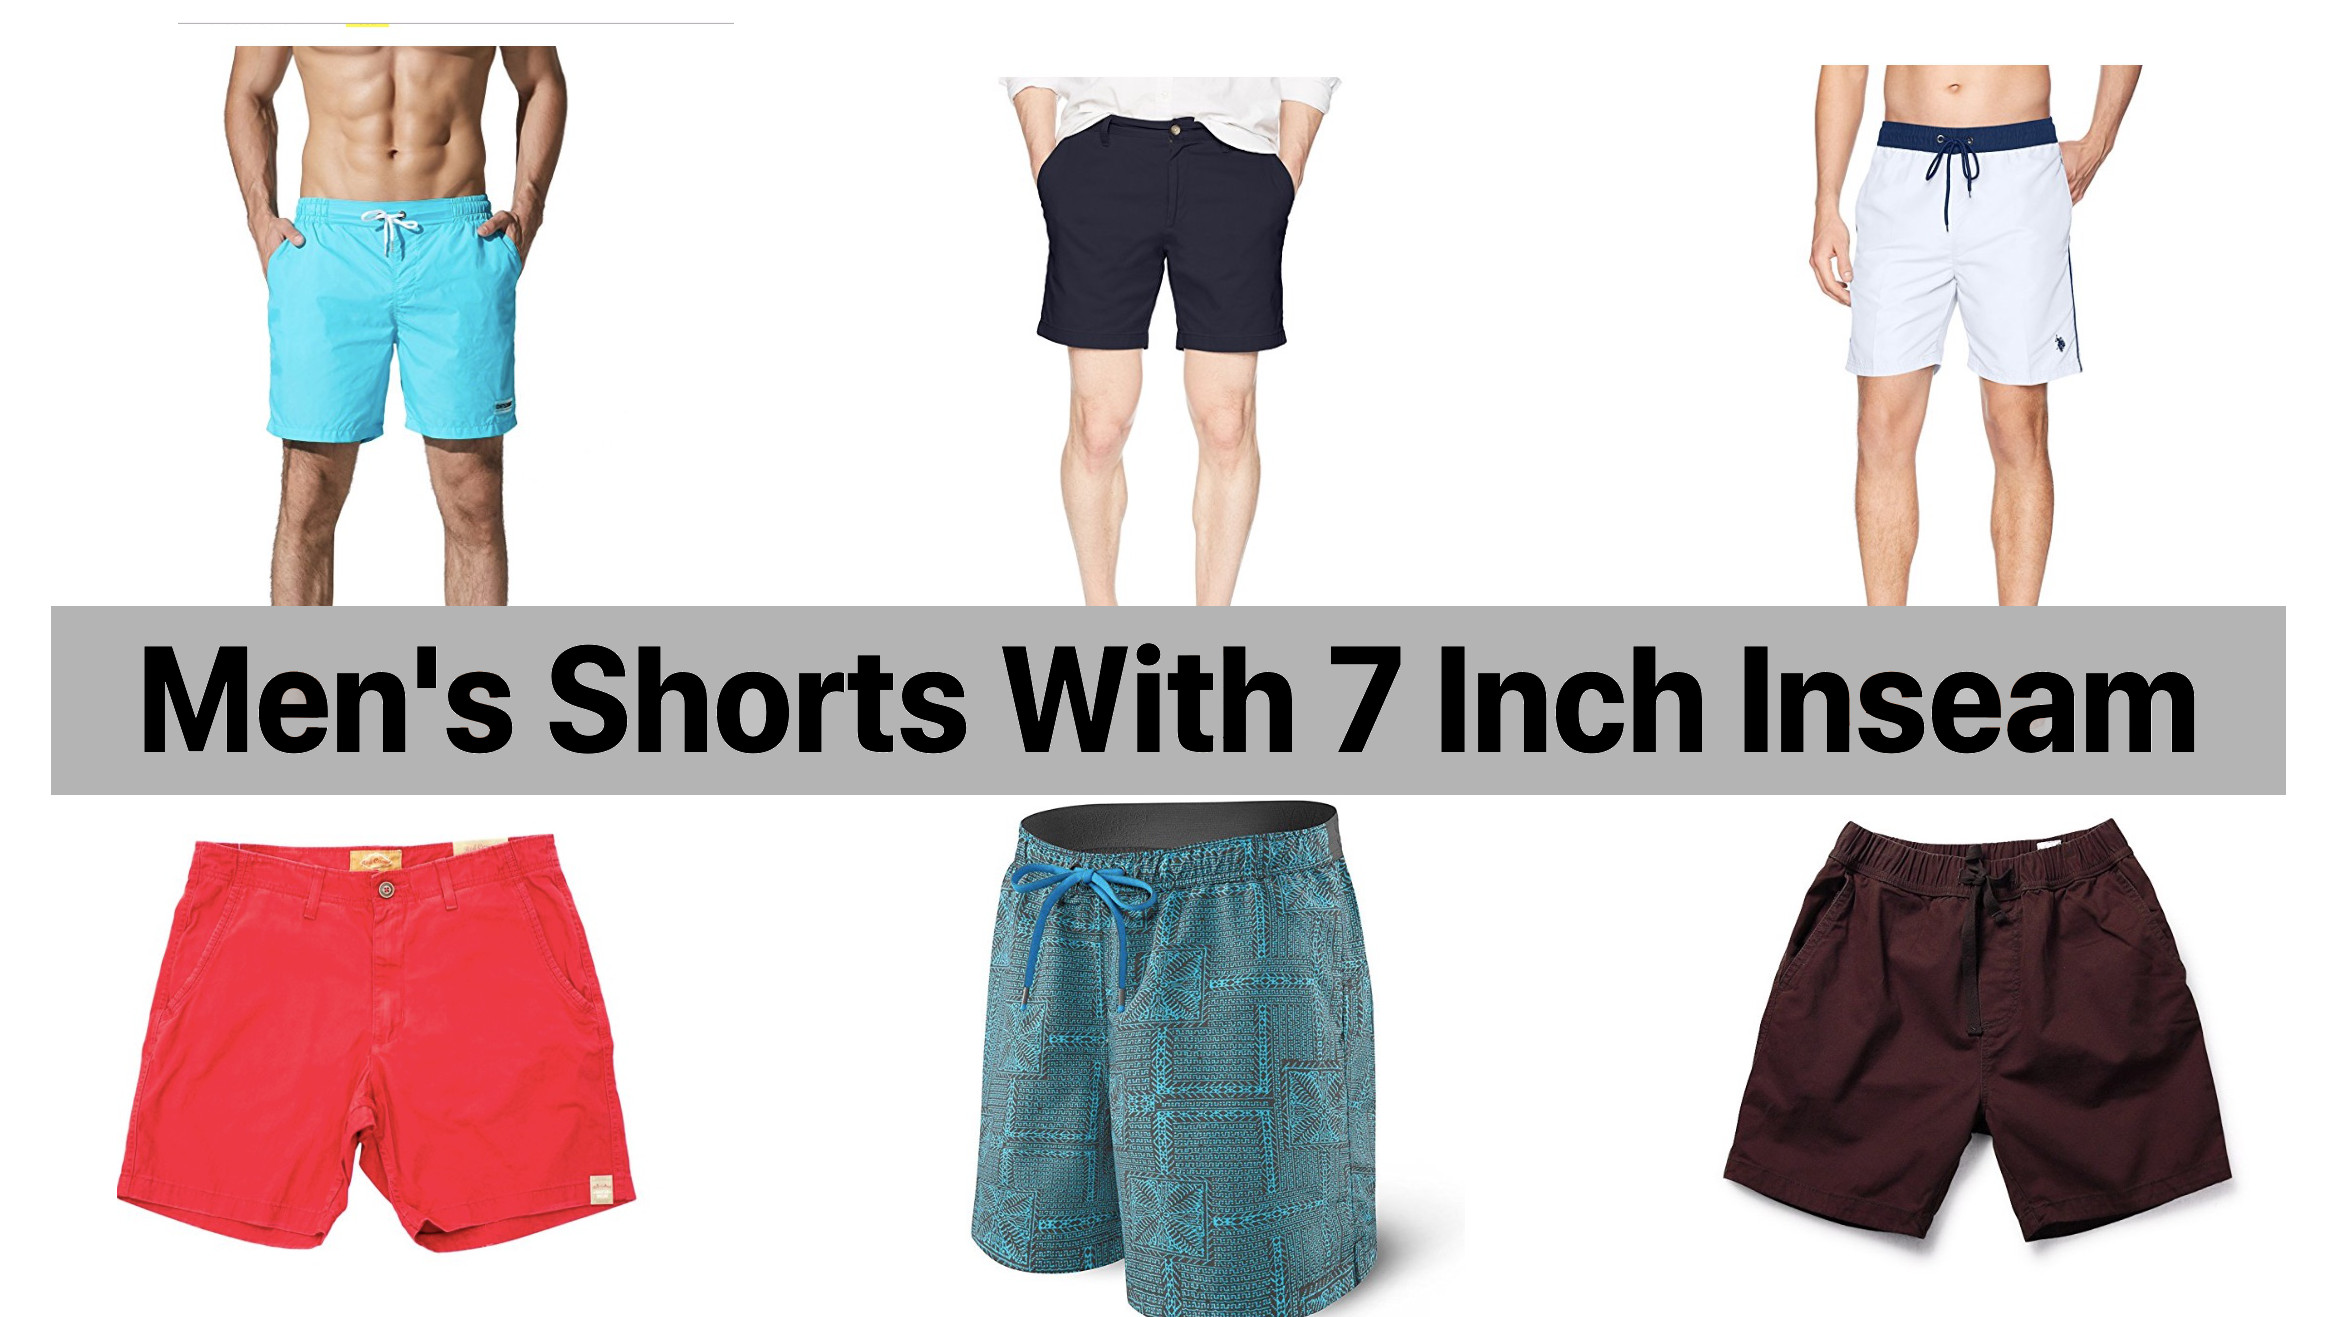 20 Men’s Shorts With 7 Inch Inseam to Rock at a Festival | Heavy.com